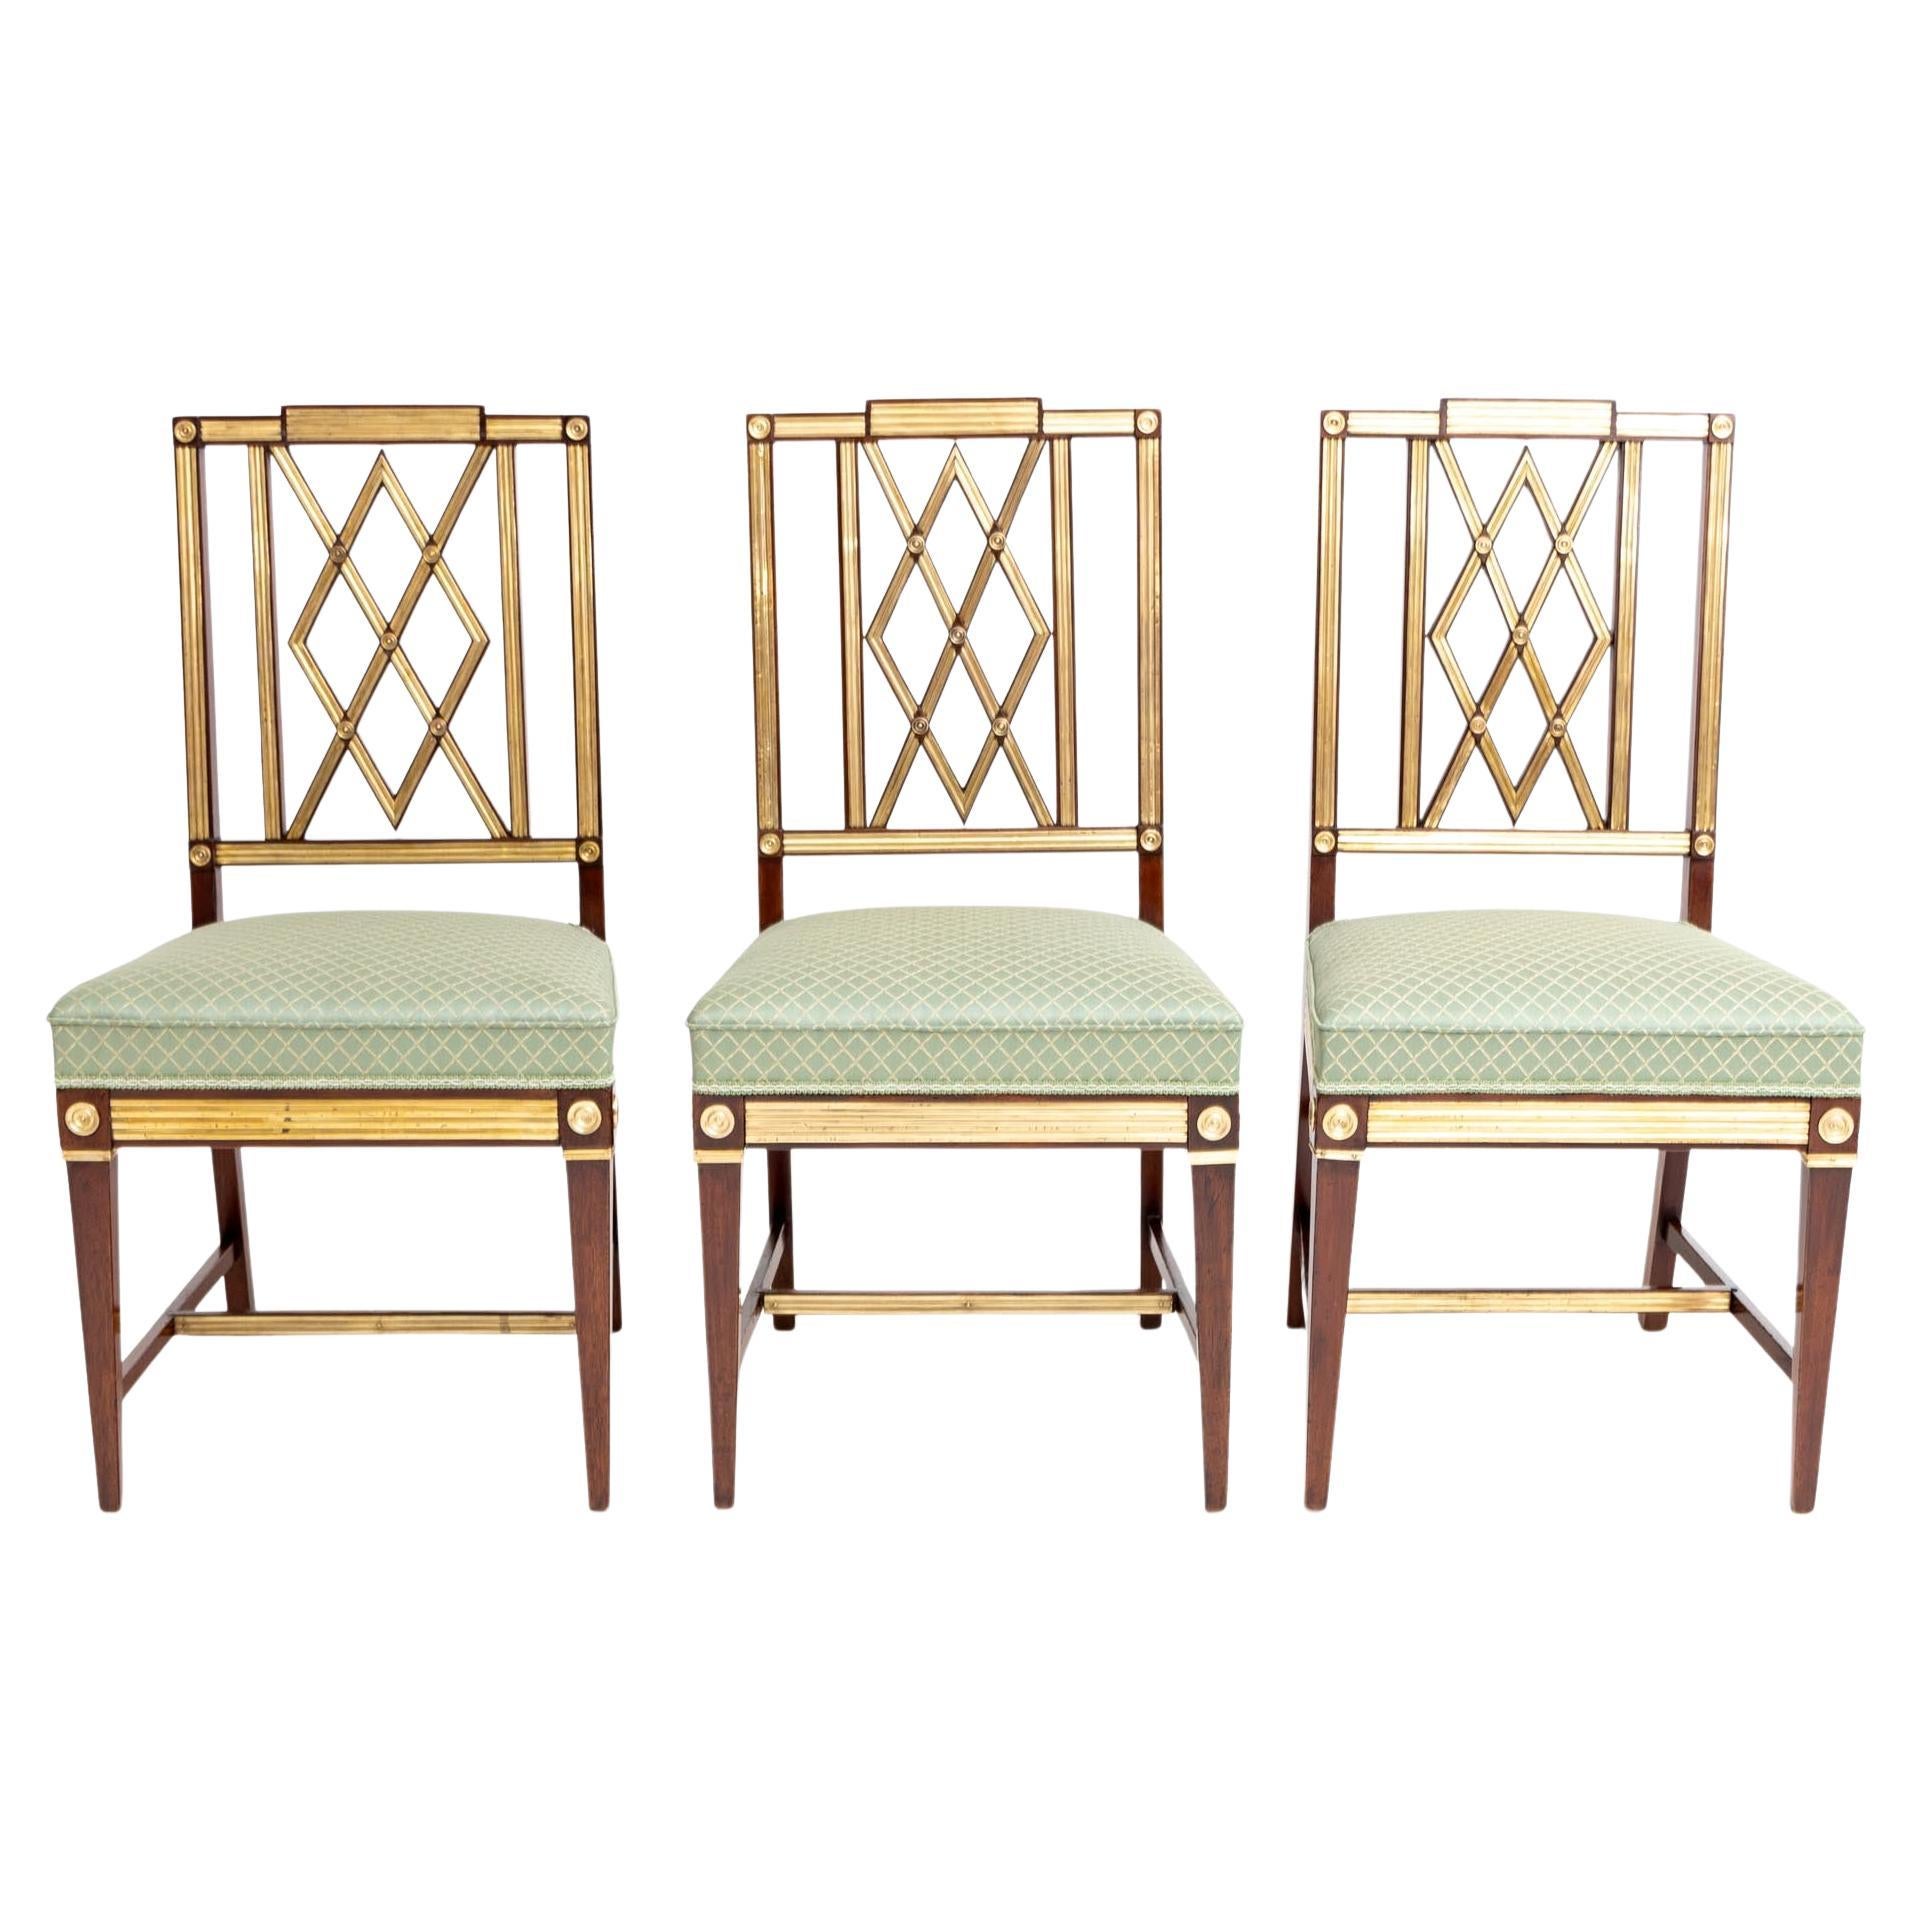 Neoclassical Dining Room Chairs, Baltic, End of 18th Century